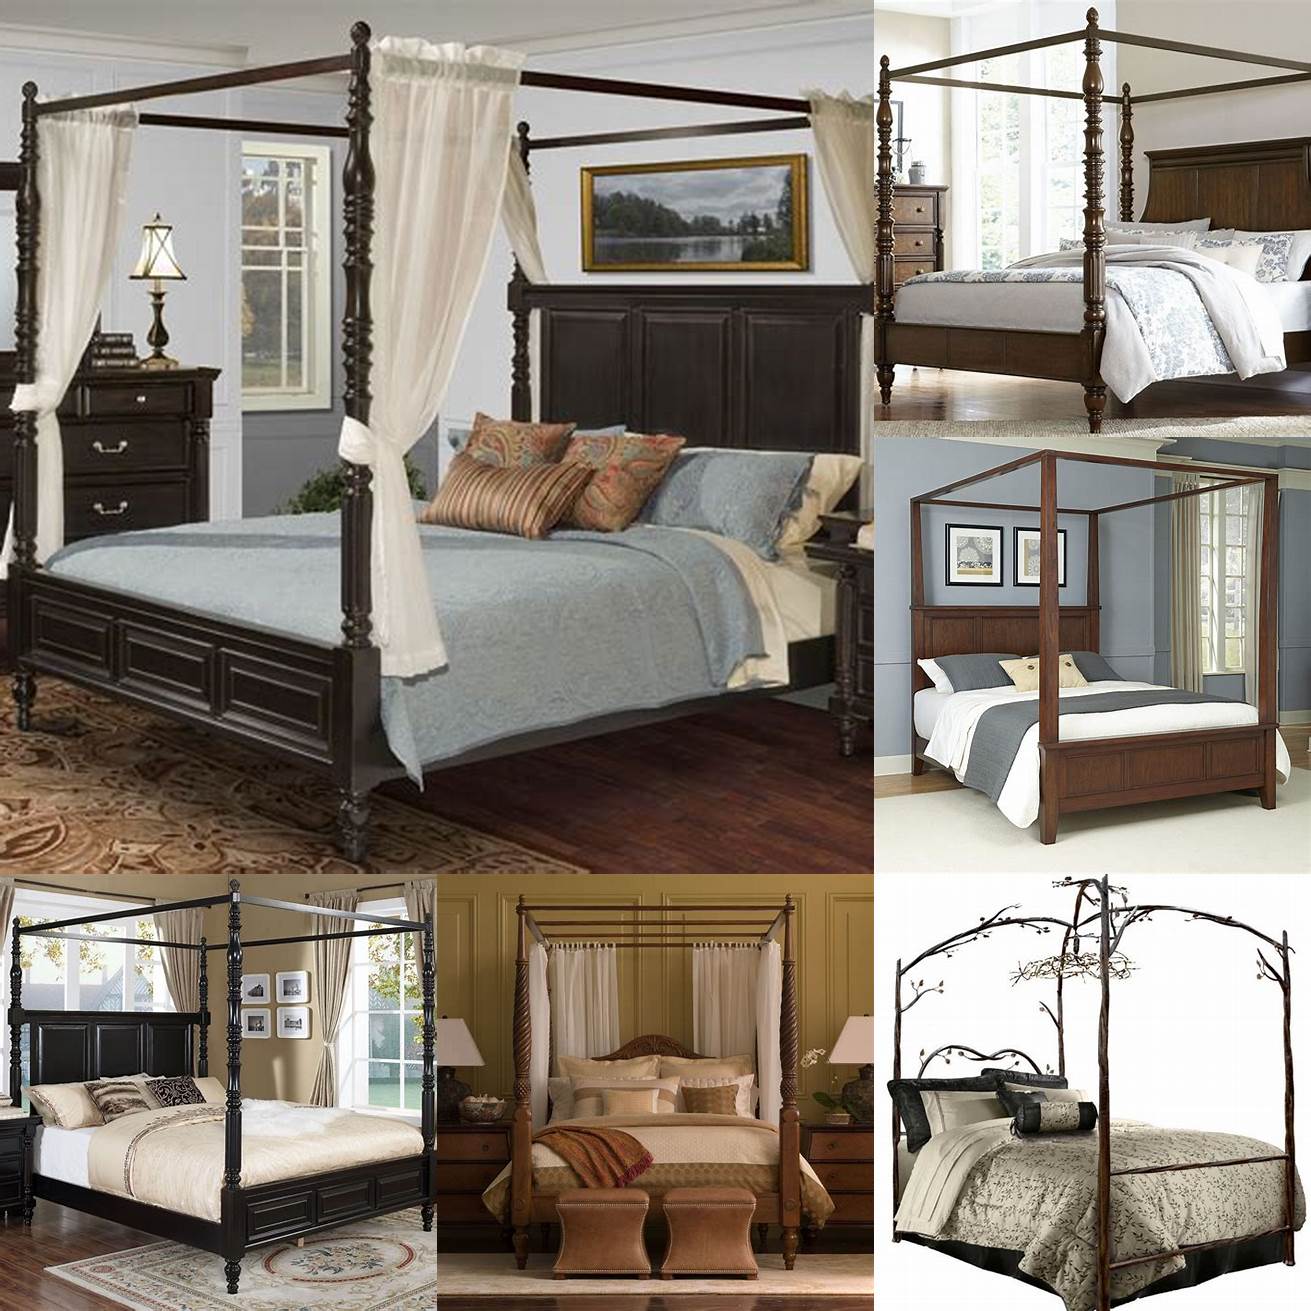 Image of a Canopy California King Bed